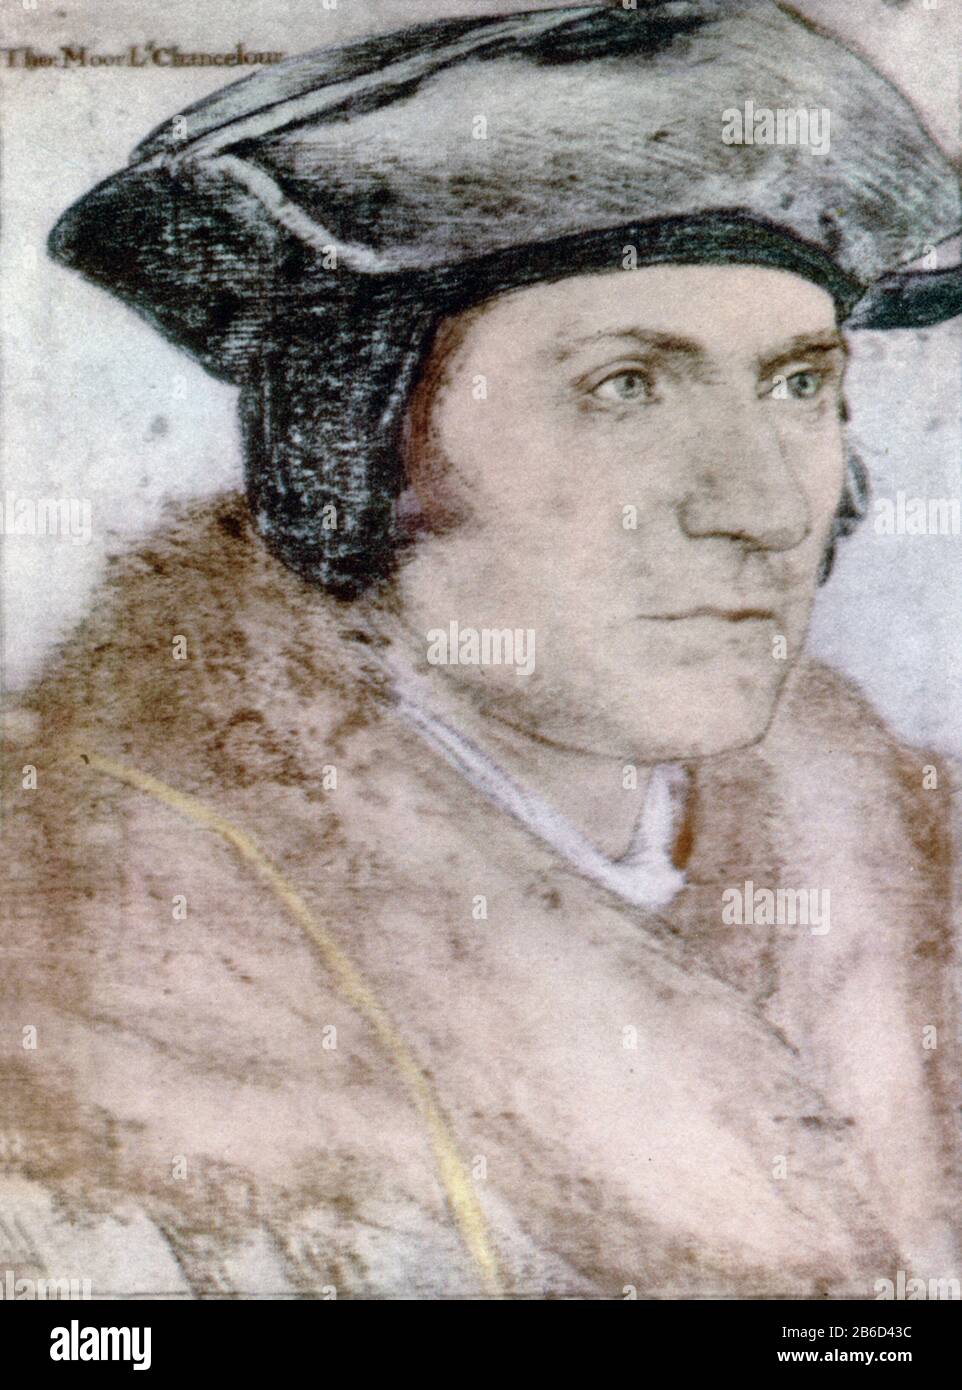 Sir Thomas More (1478-1535) c1526-7. By Hans Holbein the Younger (1497/8-1543). Sir Thomas More (1478-1535), venerated in the Catholic Church as Saint Thomas More, was an English lawyer, social philosopher, author, statesman, and Renaissance humanist. He was also a Chancellor to Henry VIII, and Lord High Chancellor of England from October 1529 to May 1532. Stock Photo